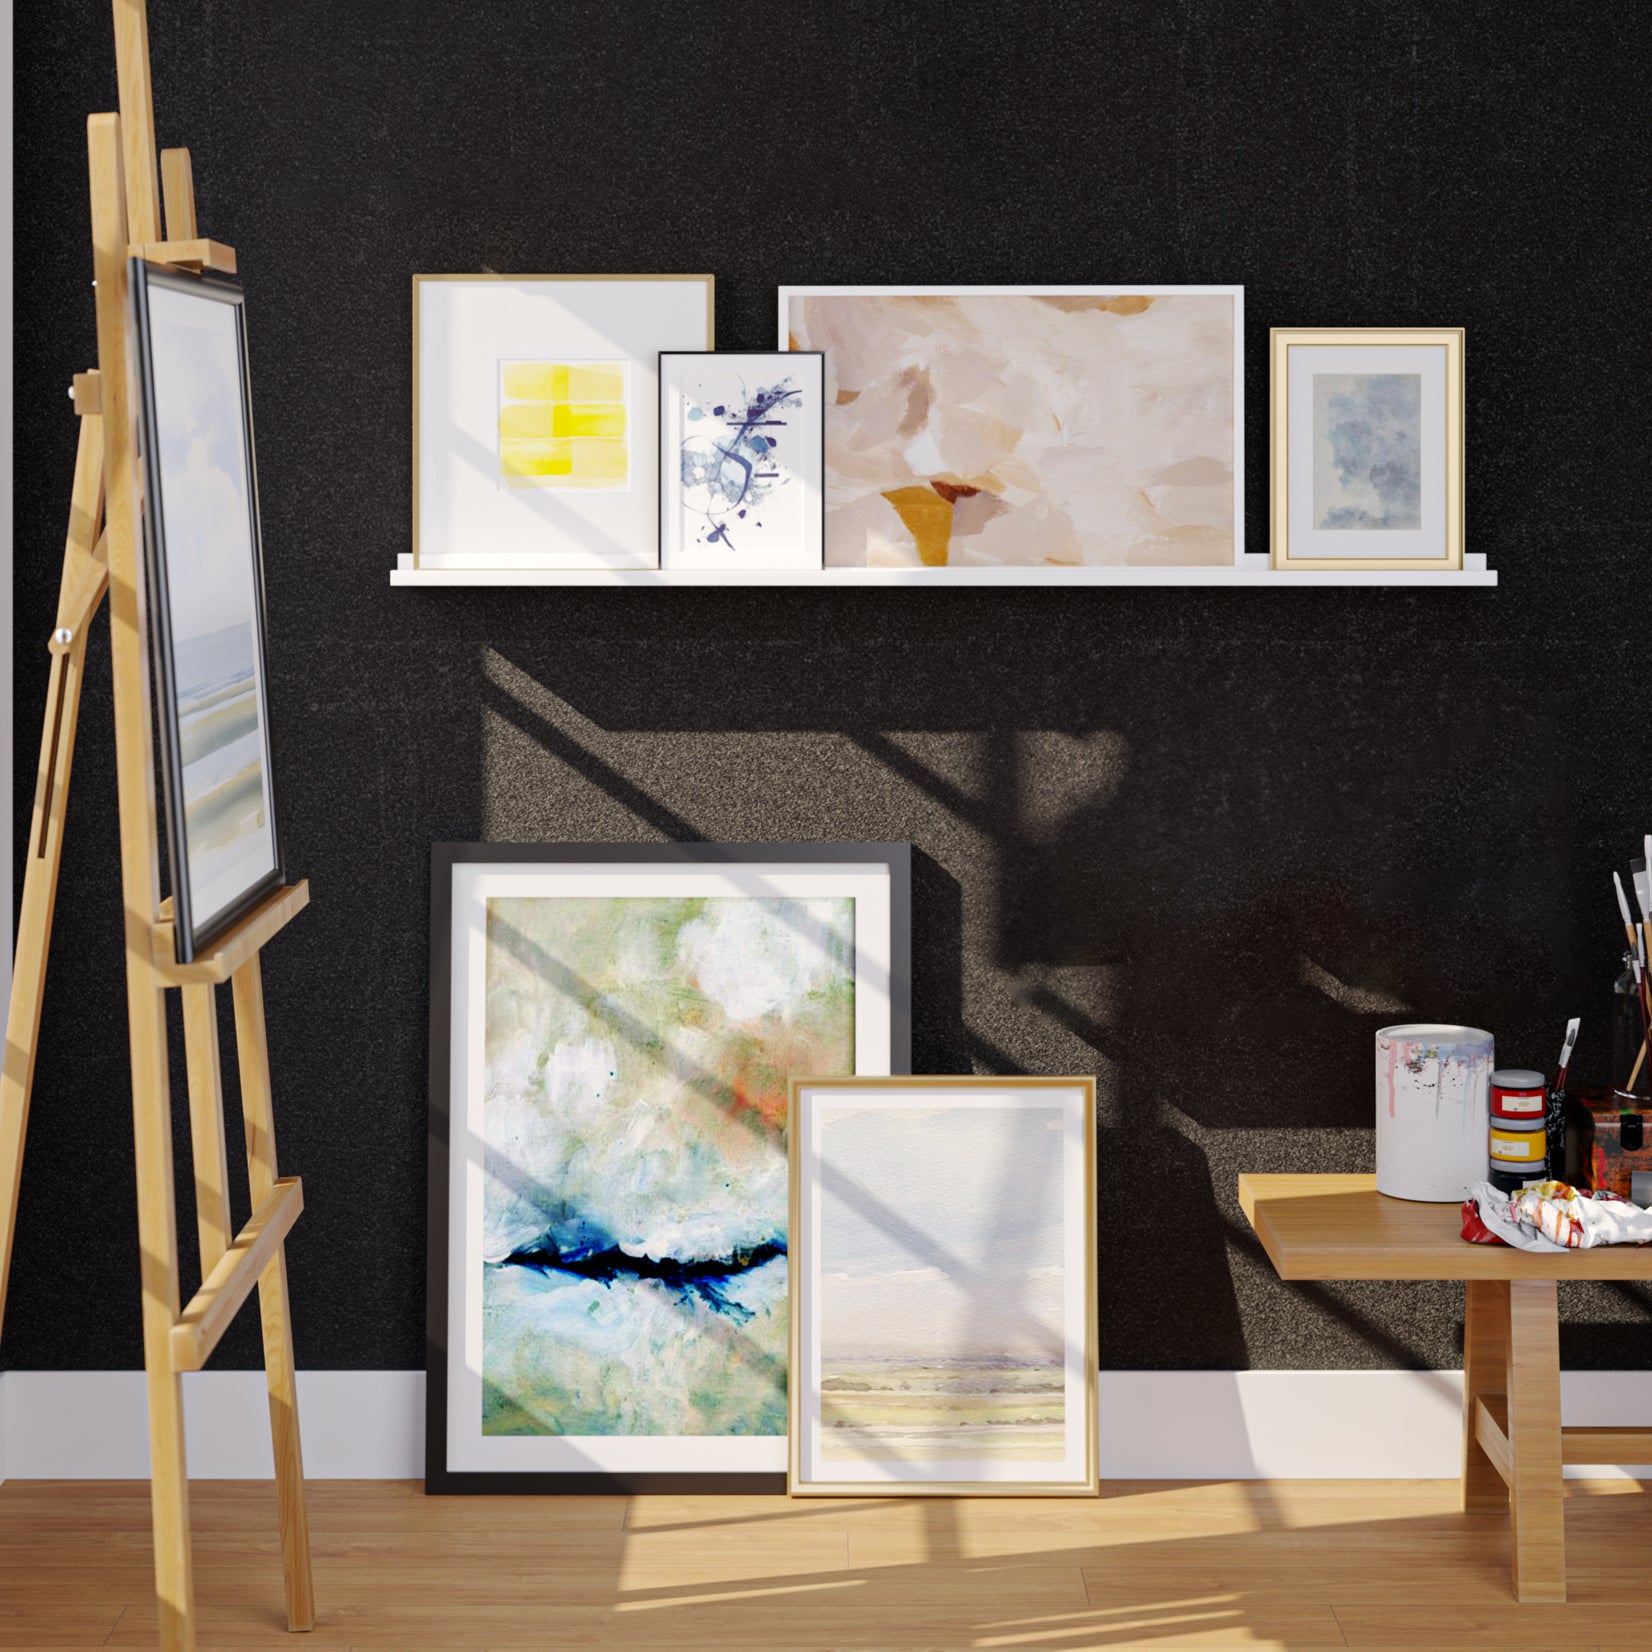 An artist’s studio with a wooden easel, paintings on shelves, and art supplies on a table against a black wall.